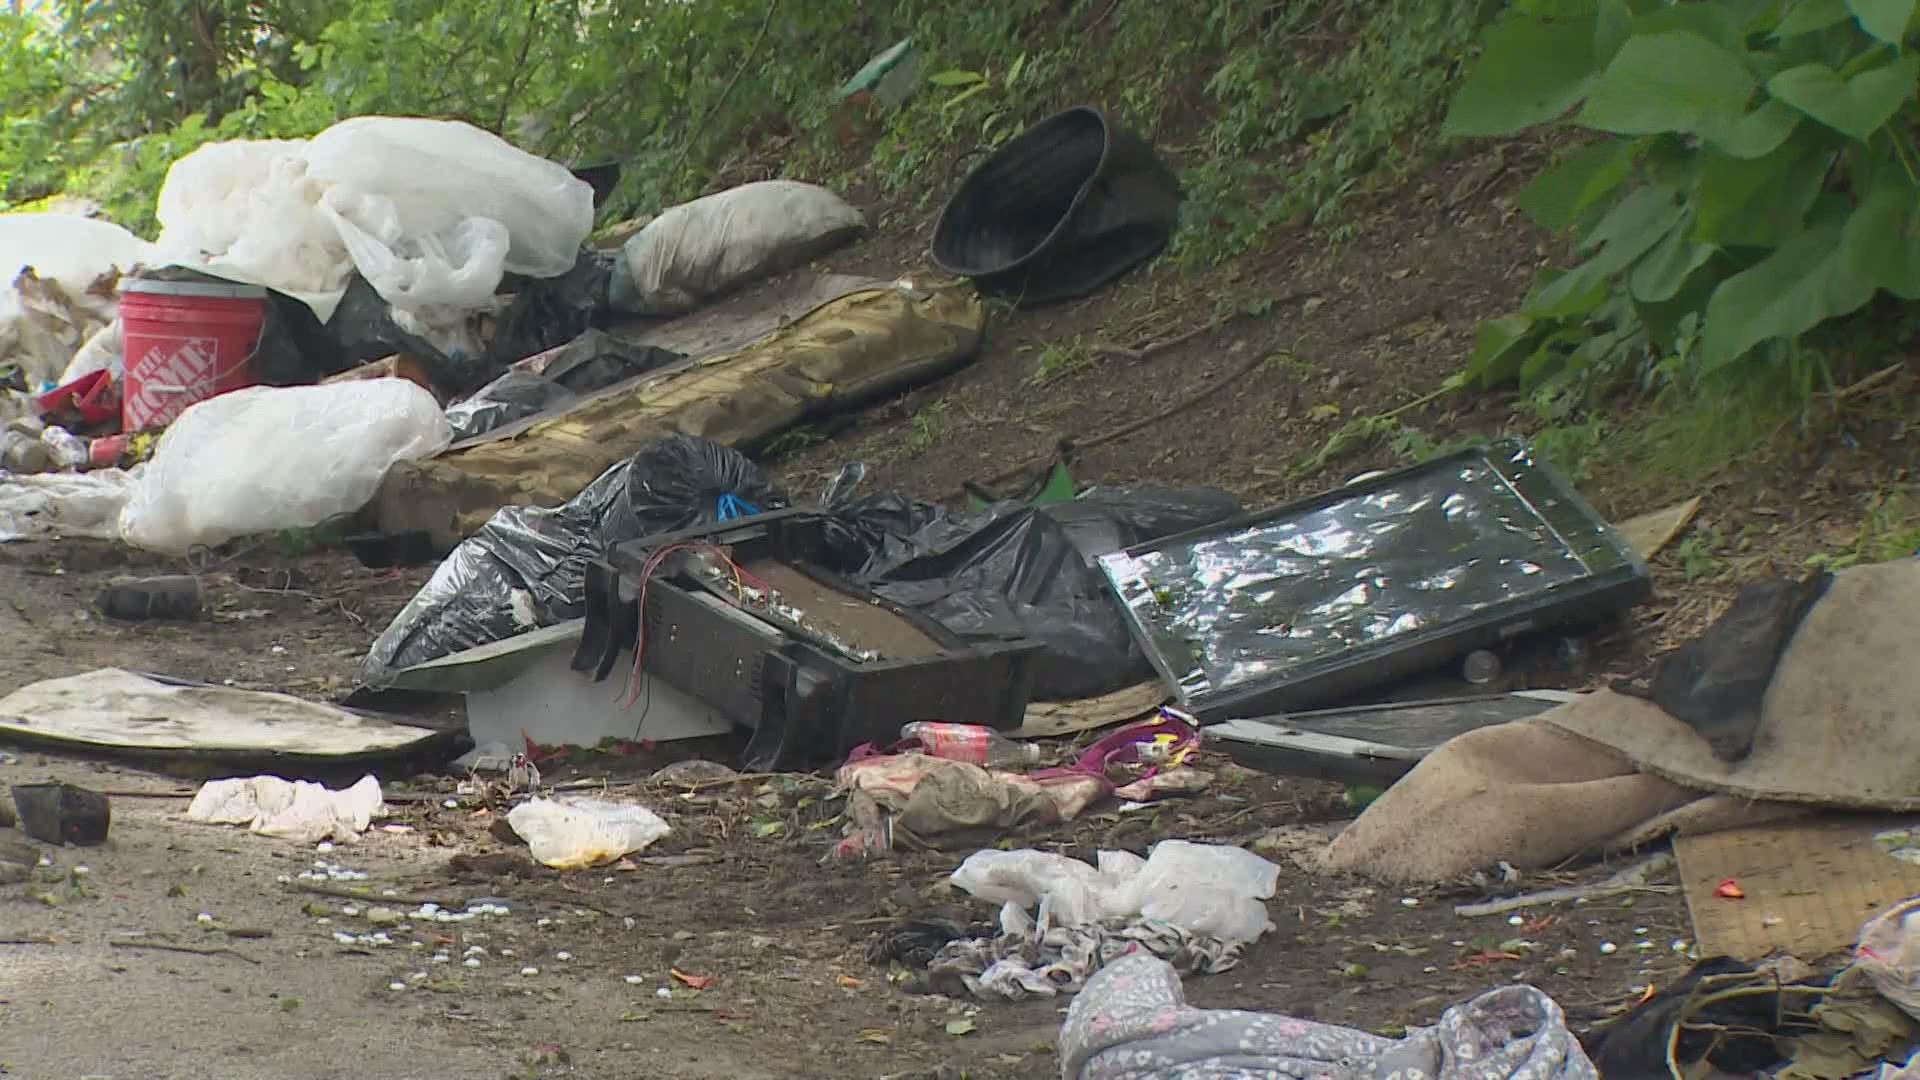 A Dallas property owner is fighting city hall over trash ending up on his property.